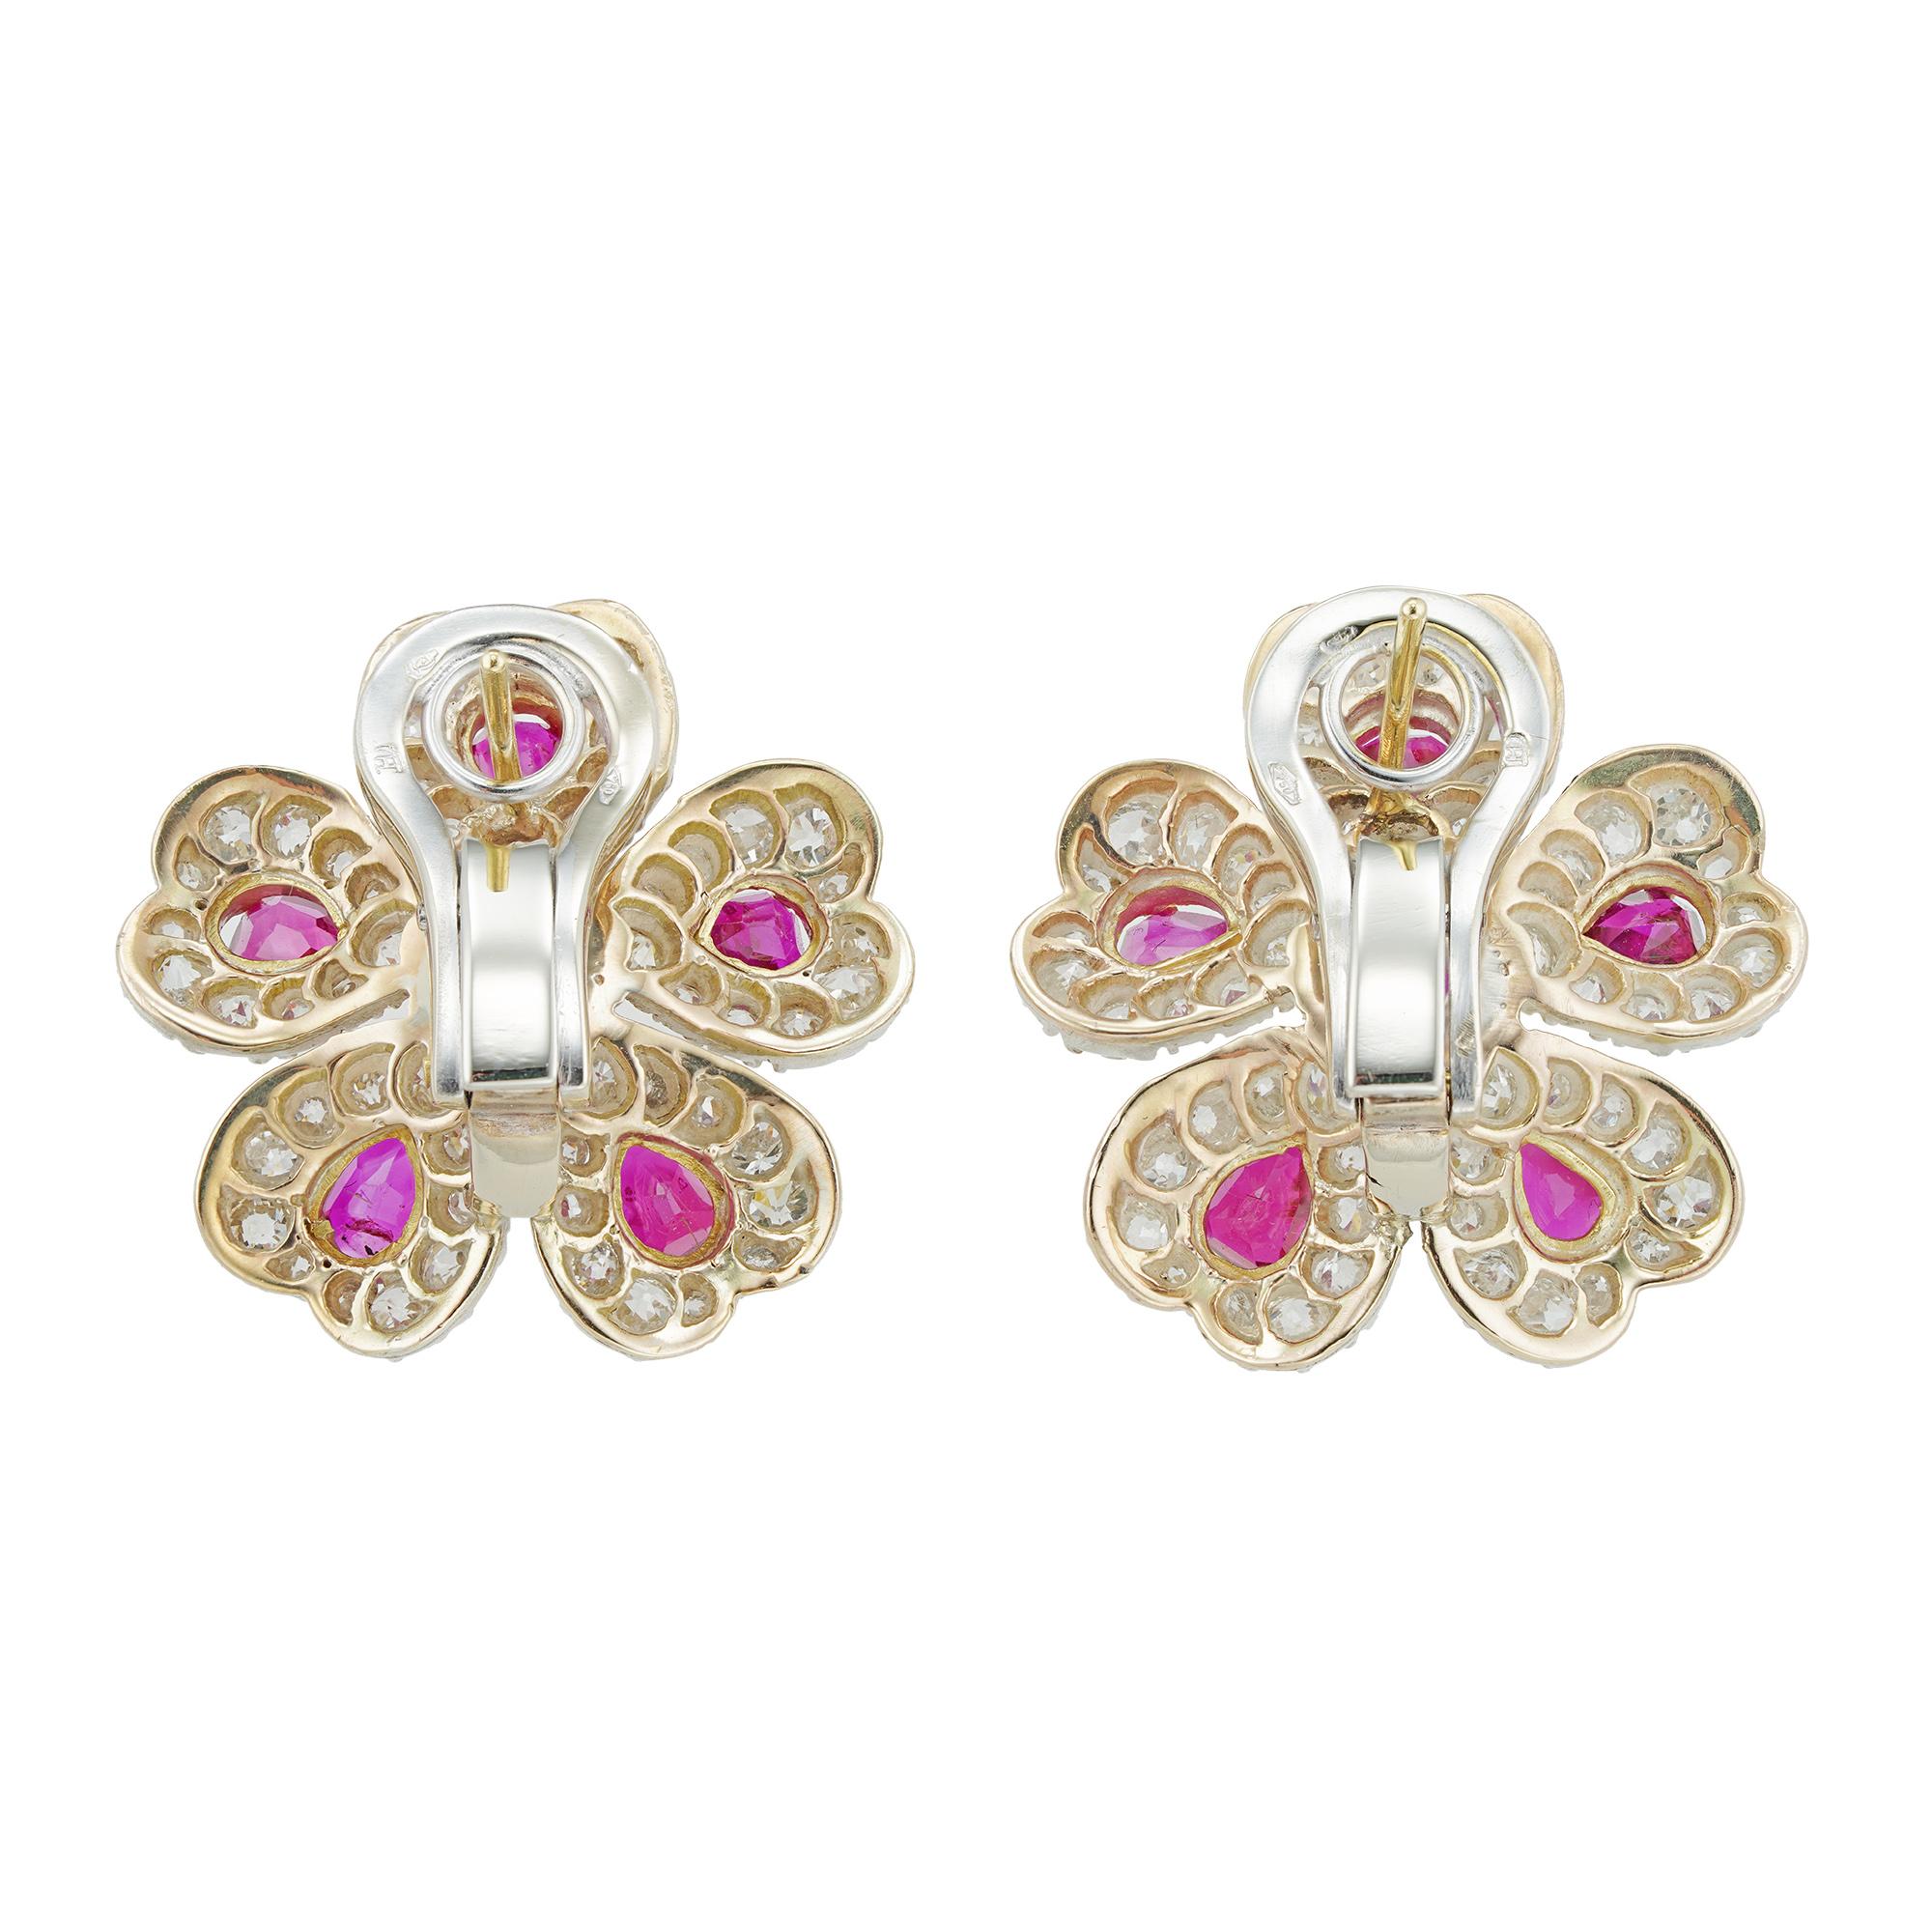 Brilliant Cut Pair of Late Victorian Ruby and Diamond Earrings For Sale